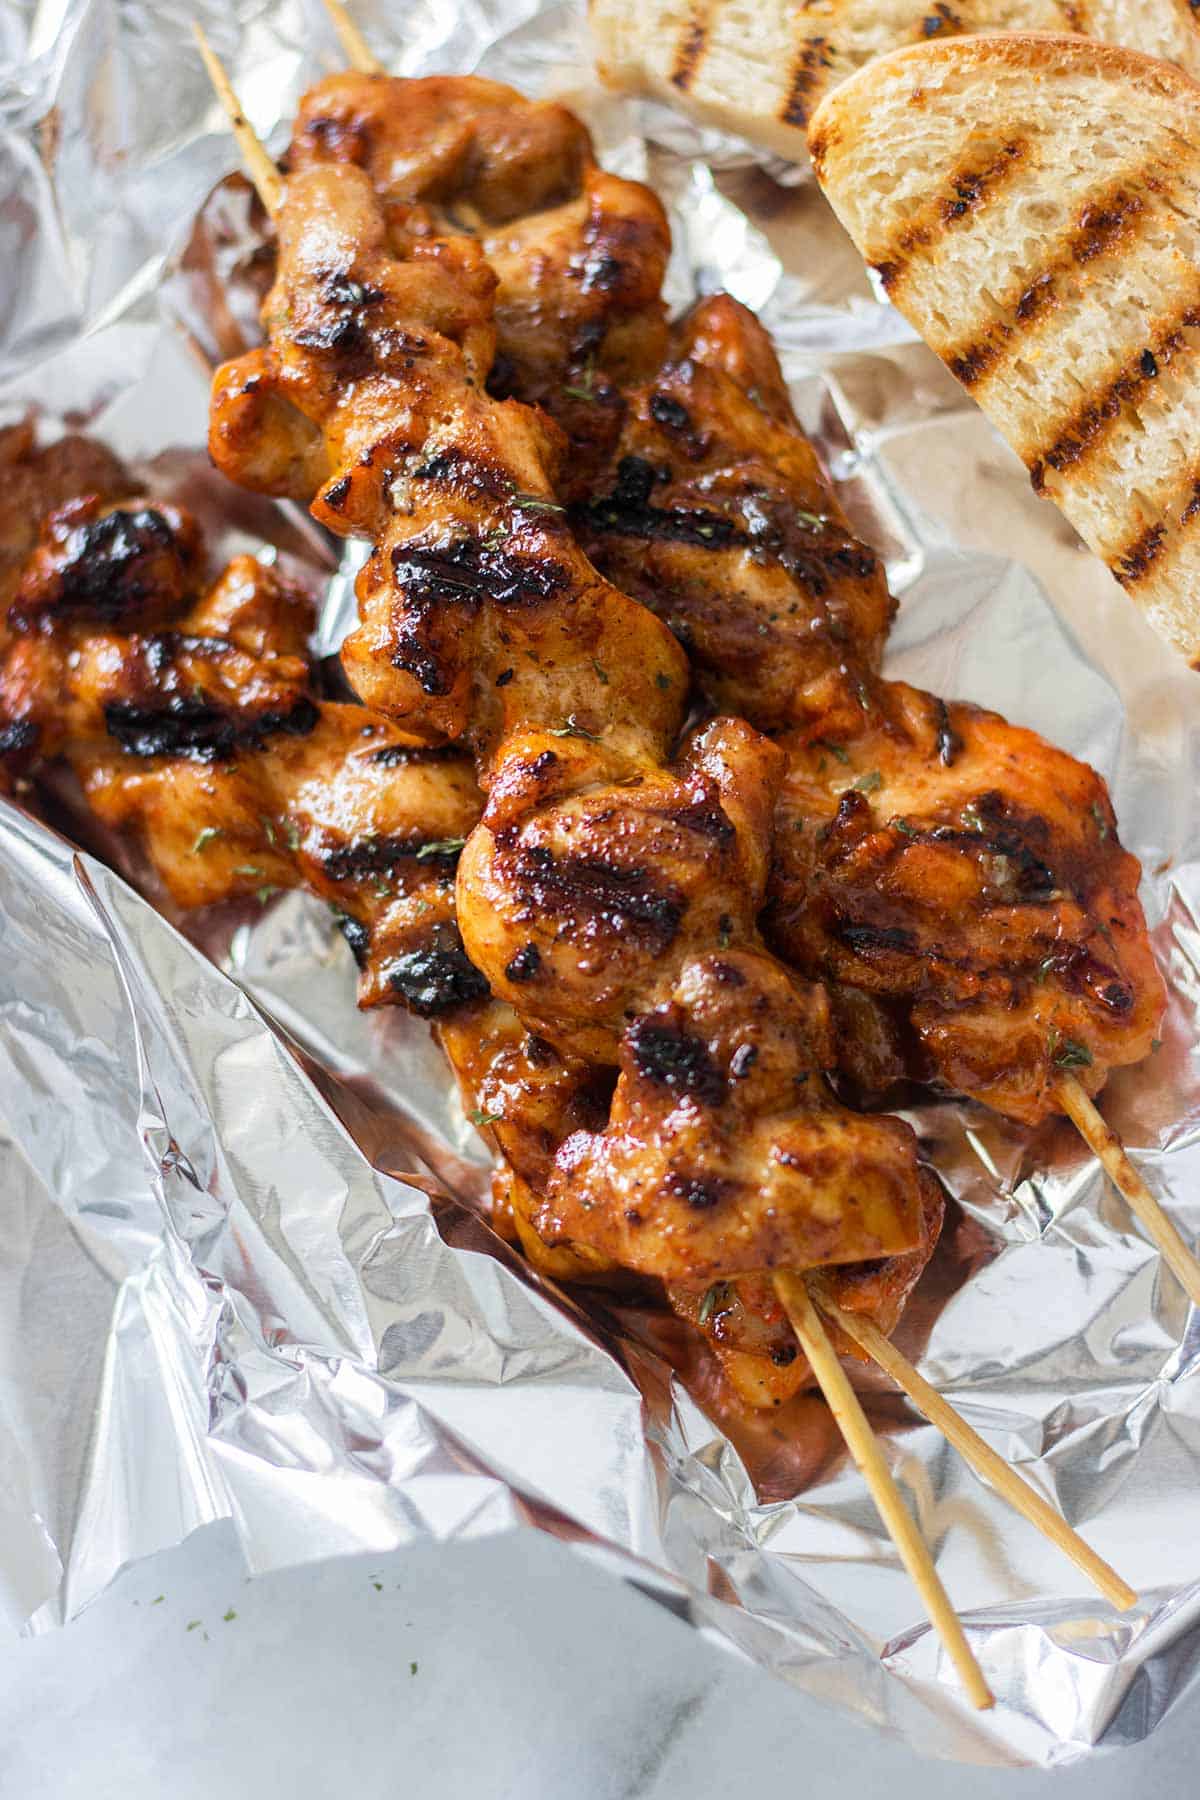 3 chicken skewers with bread on foil.